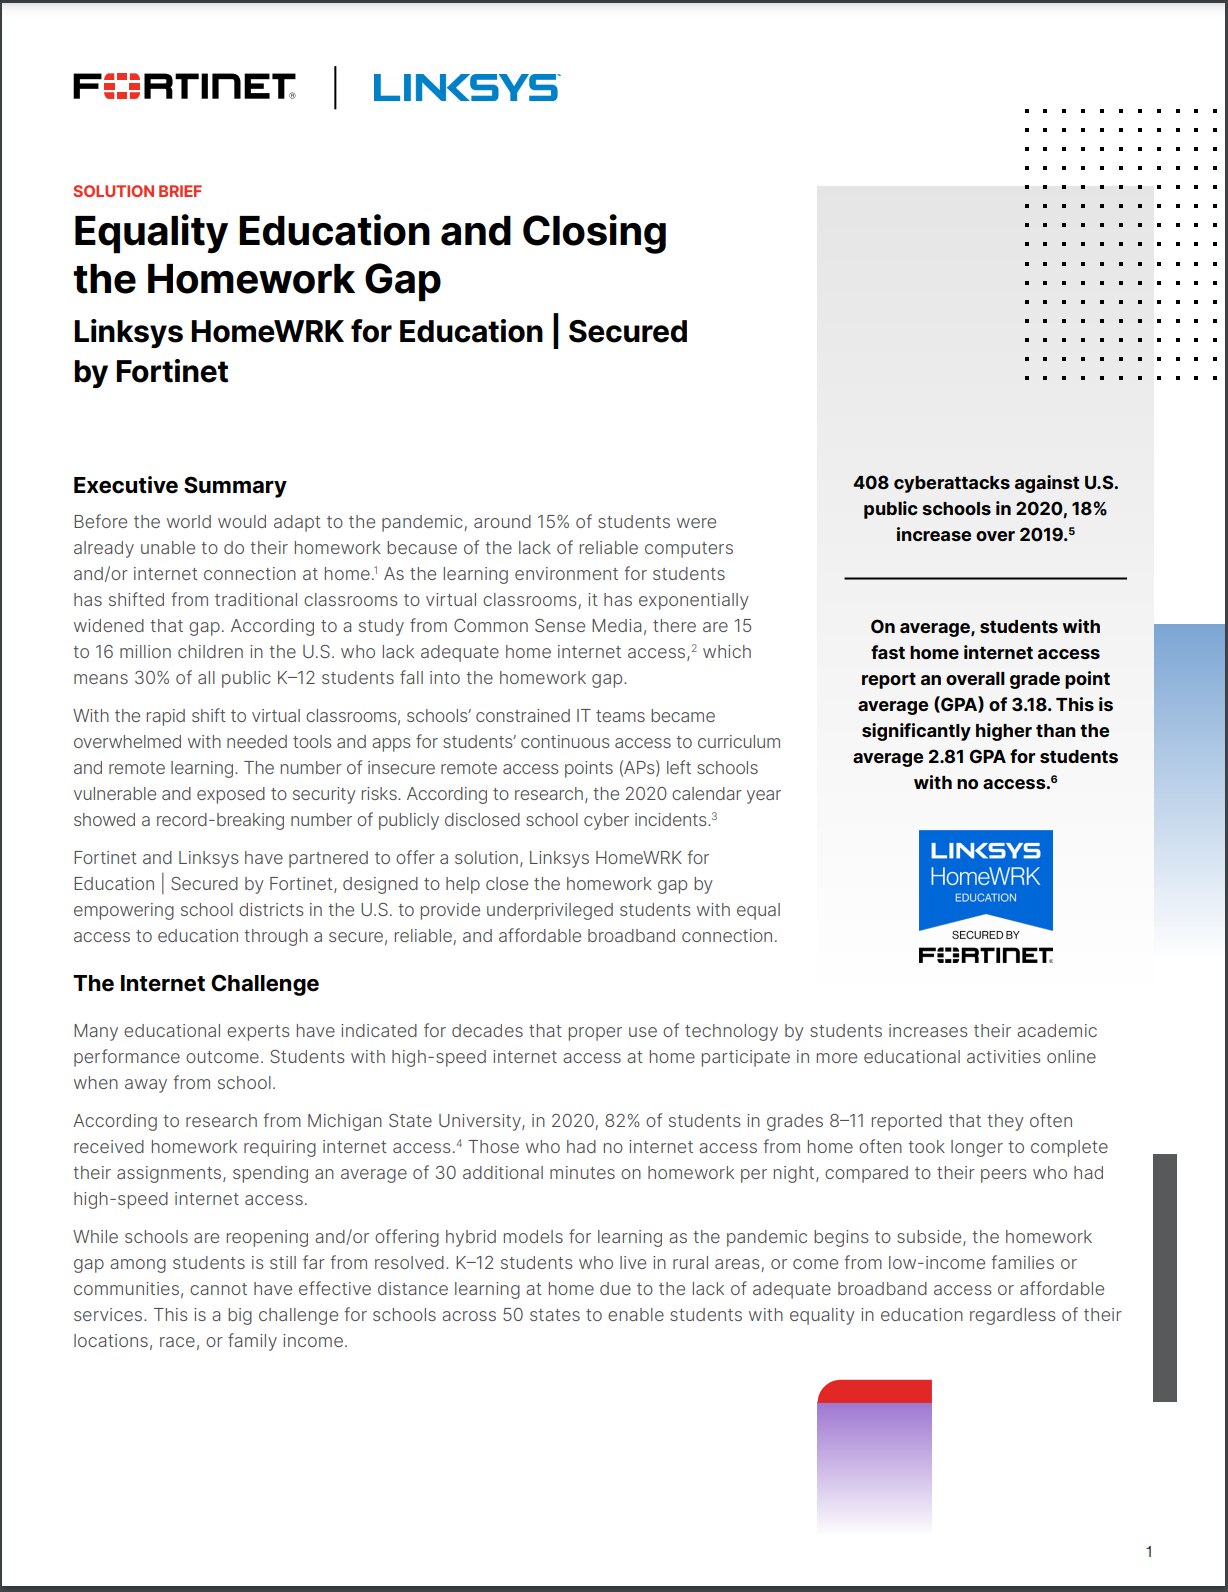 Solution Brief Equality Education and Closing the Homework Gap (sold in package, 10pc per package)